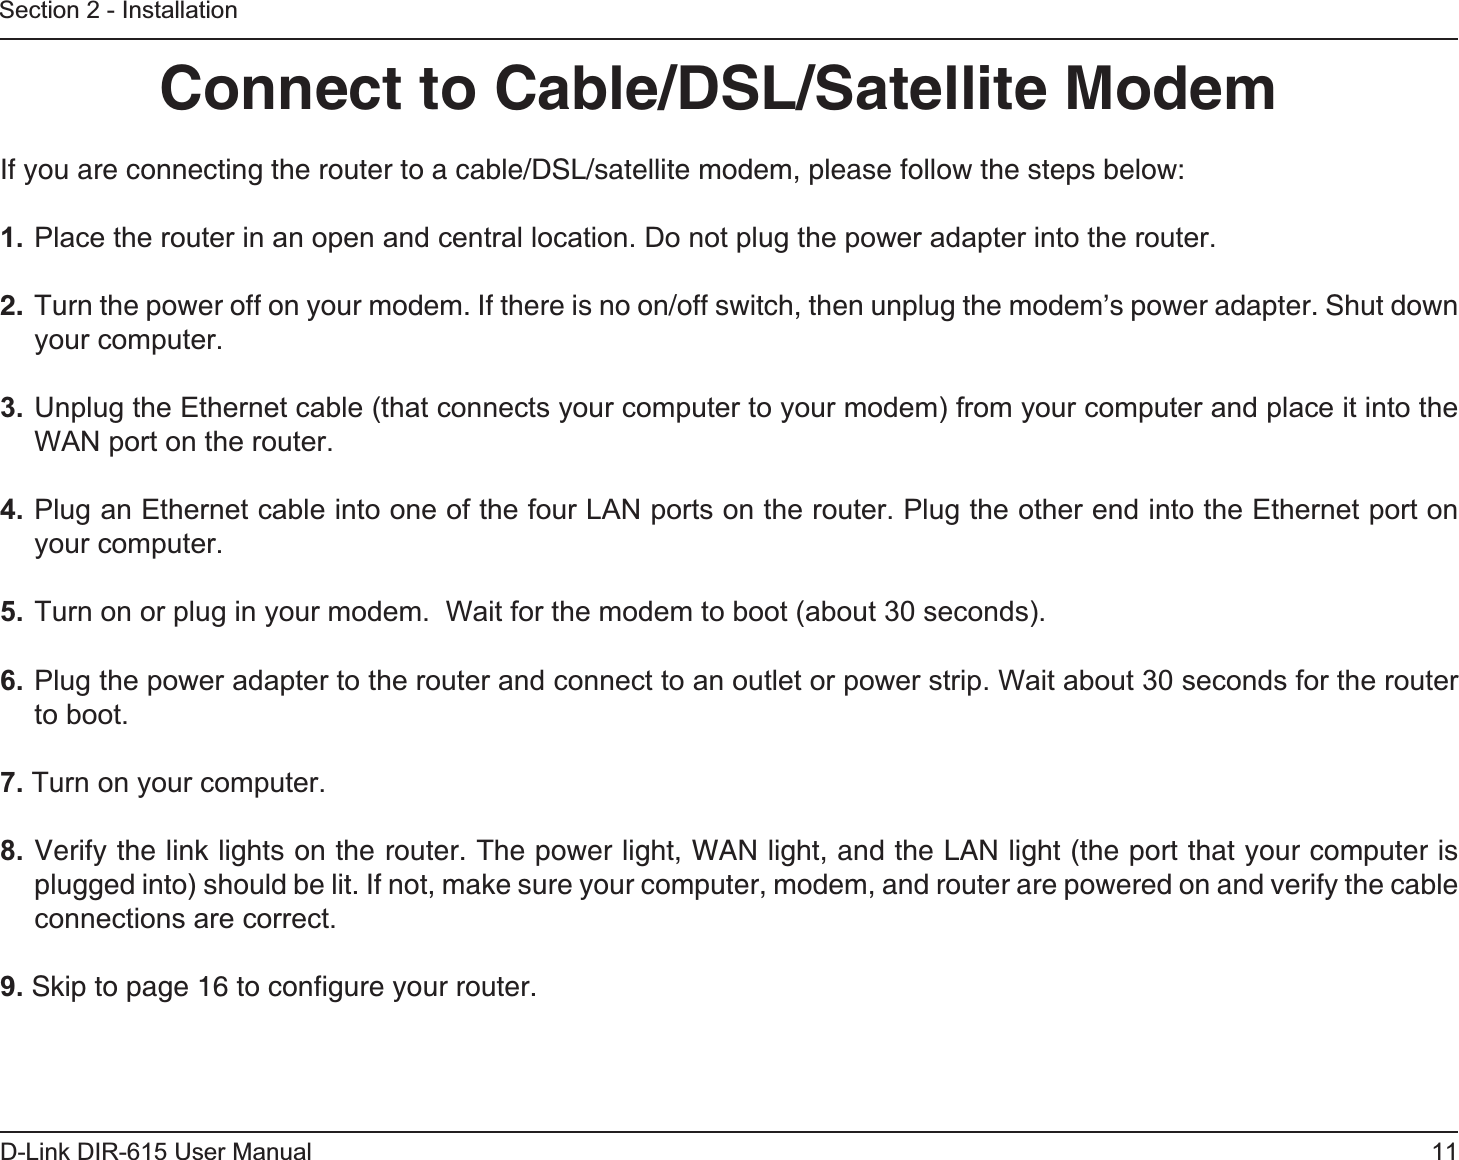 11D-Link DIR-615 User ManualSection 2 - InstallationIf you are connecting the router to a cable/DSL/satellite modem, please follow the steps below:1. Place the router in an open and central location. Do not plug the power adapter into the router. 2.  Turn the power off on your modem. If there is no on/off switch, then unplug the modem’s power adapter. Shut down your computer.3. Unplug the Ethernet cable (that connects your computer to your modem) from your computer and place it into the WAN port on the router.4. Plug an Ethernet cable into one of the four LAN ports on the router. Plug the other end into the Ethernet port on your computer.5. Turn on or plug in your modem.  Wait for the modem to boot (about 30 seconds). 6. Plug the power adapter to the router and connect to an outlet or power strip. Wait about 30 seconds for the router to boot. 7. Turn on your computer. 8. Verify the link lights on the router. The power light, WAN light, and the LAN light (the port that your computer is plugged into) should be lit. If not, make sure your computer, modem, and router are powered on and verify the cable connections are correct. 9. Skip to page 16 to conﬁgure your router. Connect to Cable/DSL/Satellite Modem